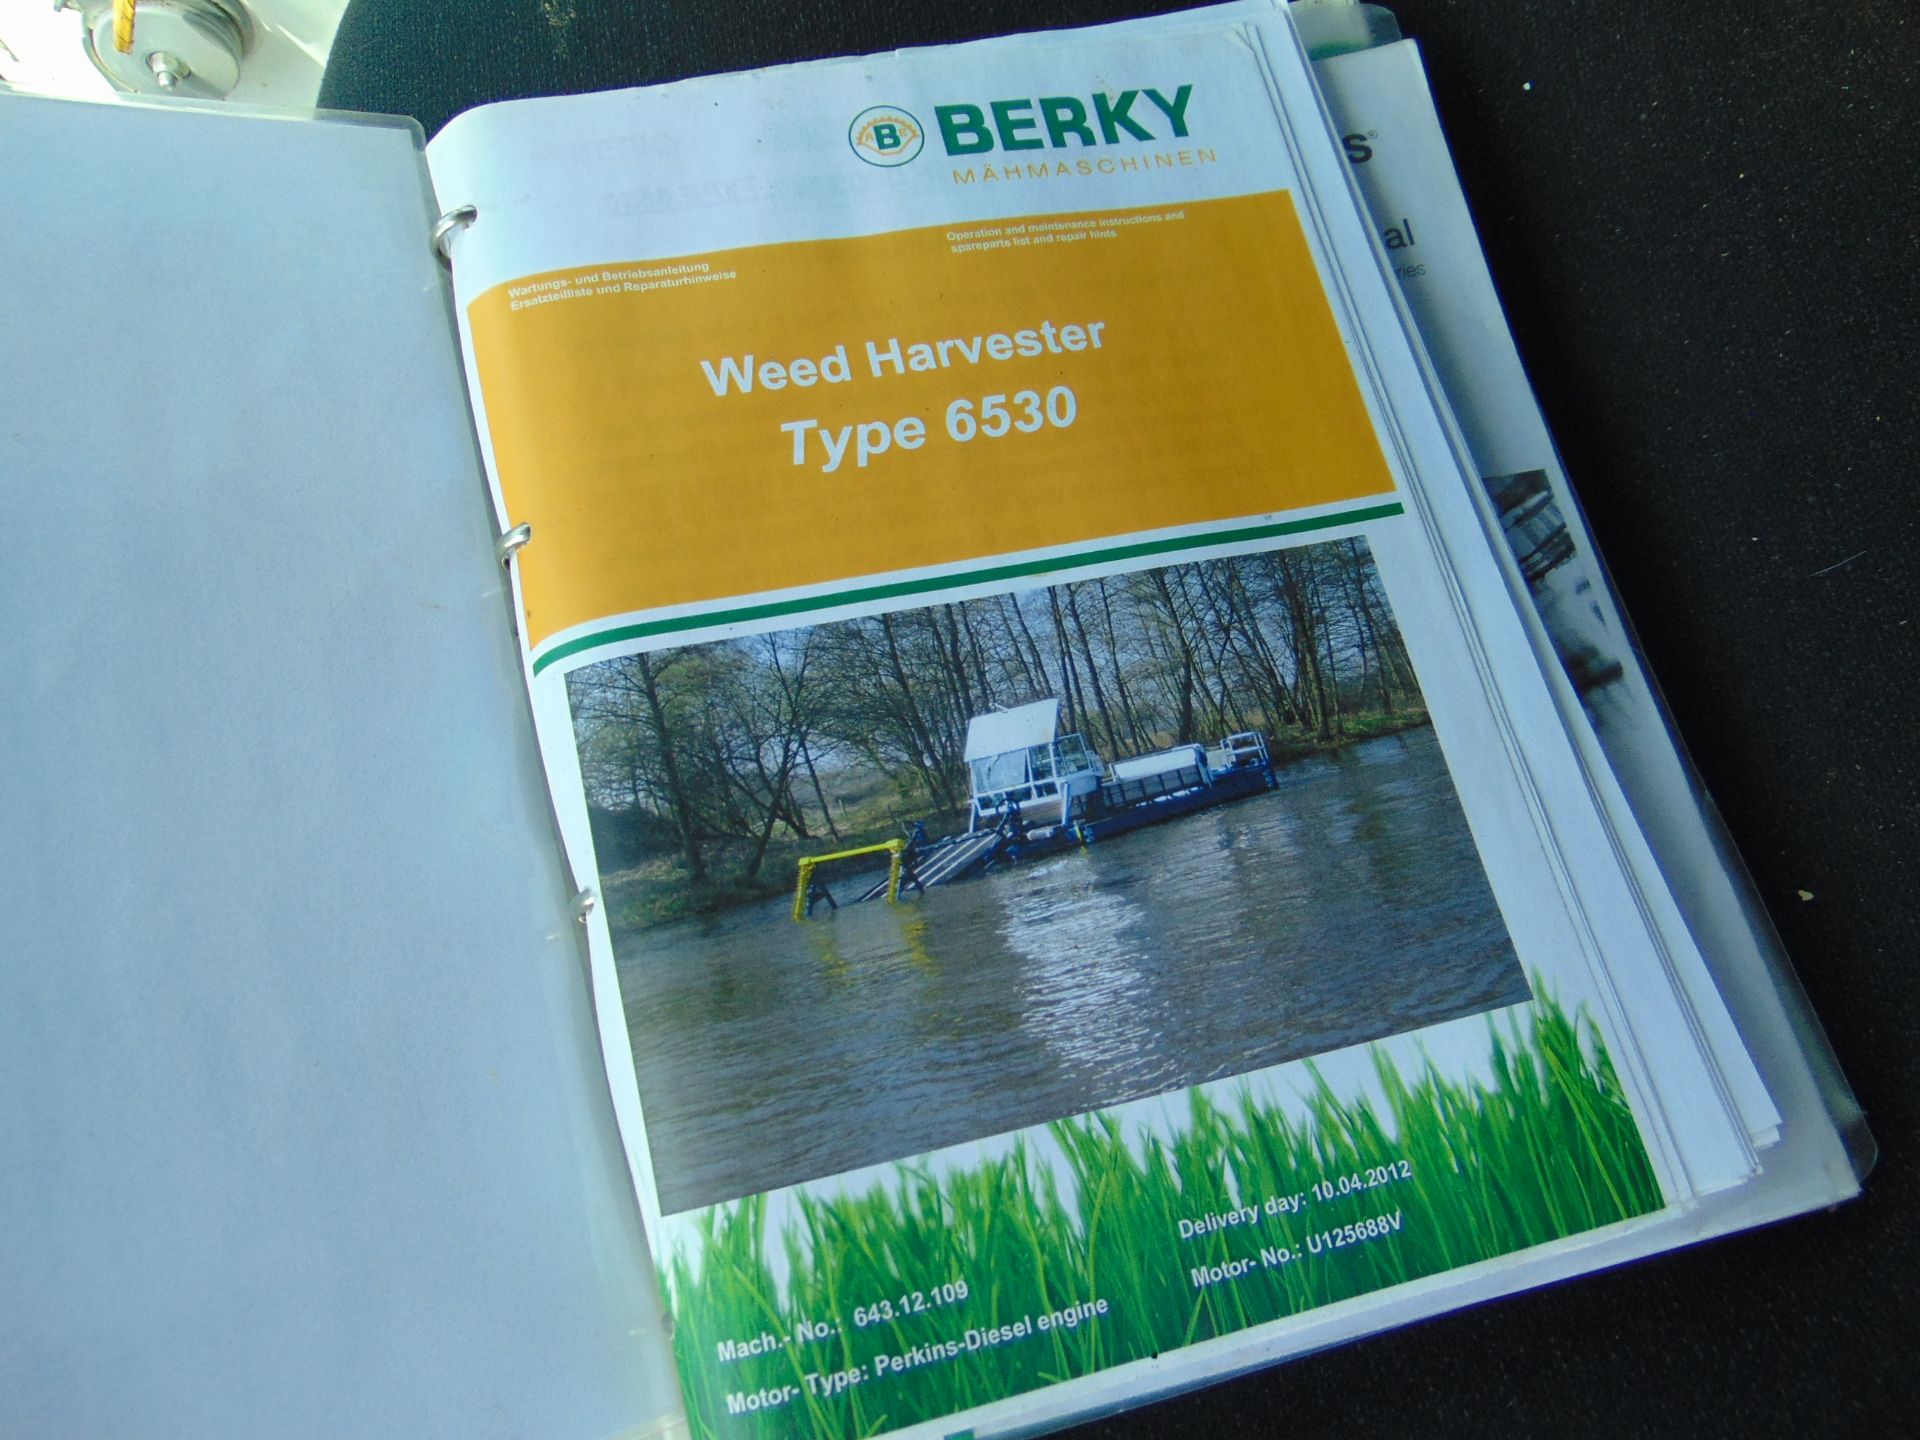 2012 Berky Type 6530 Aquatic Weed Harvester from the UK Environment Agency - Image 33 of 34